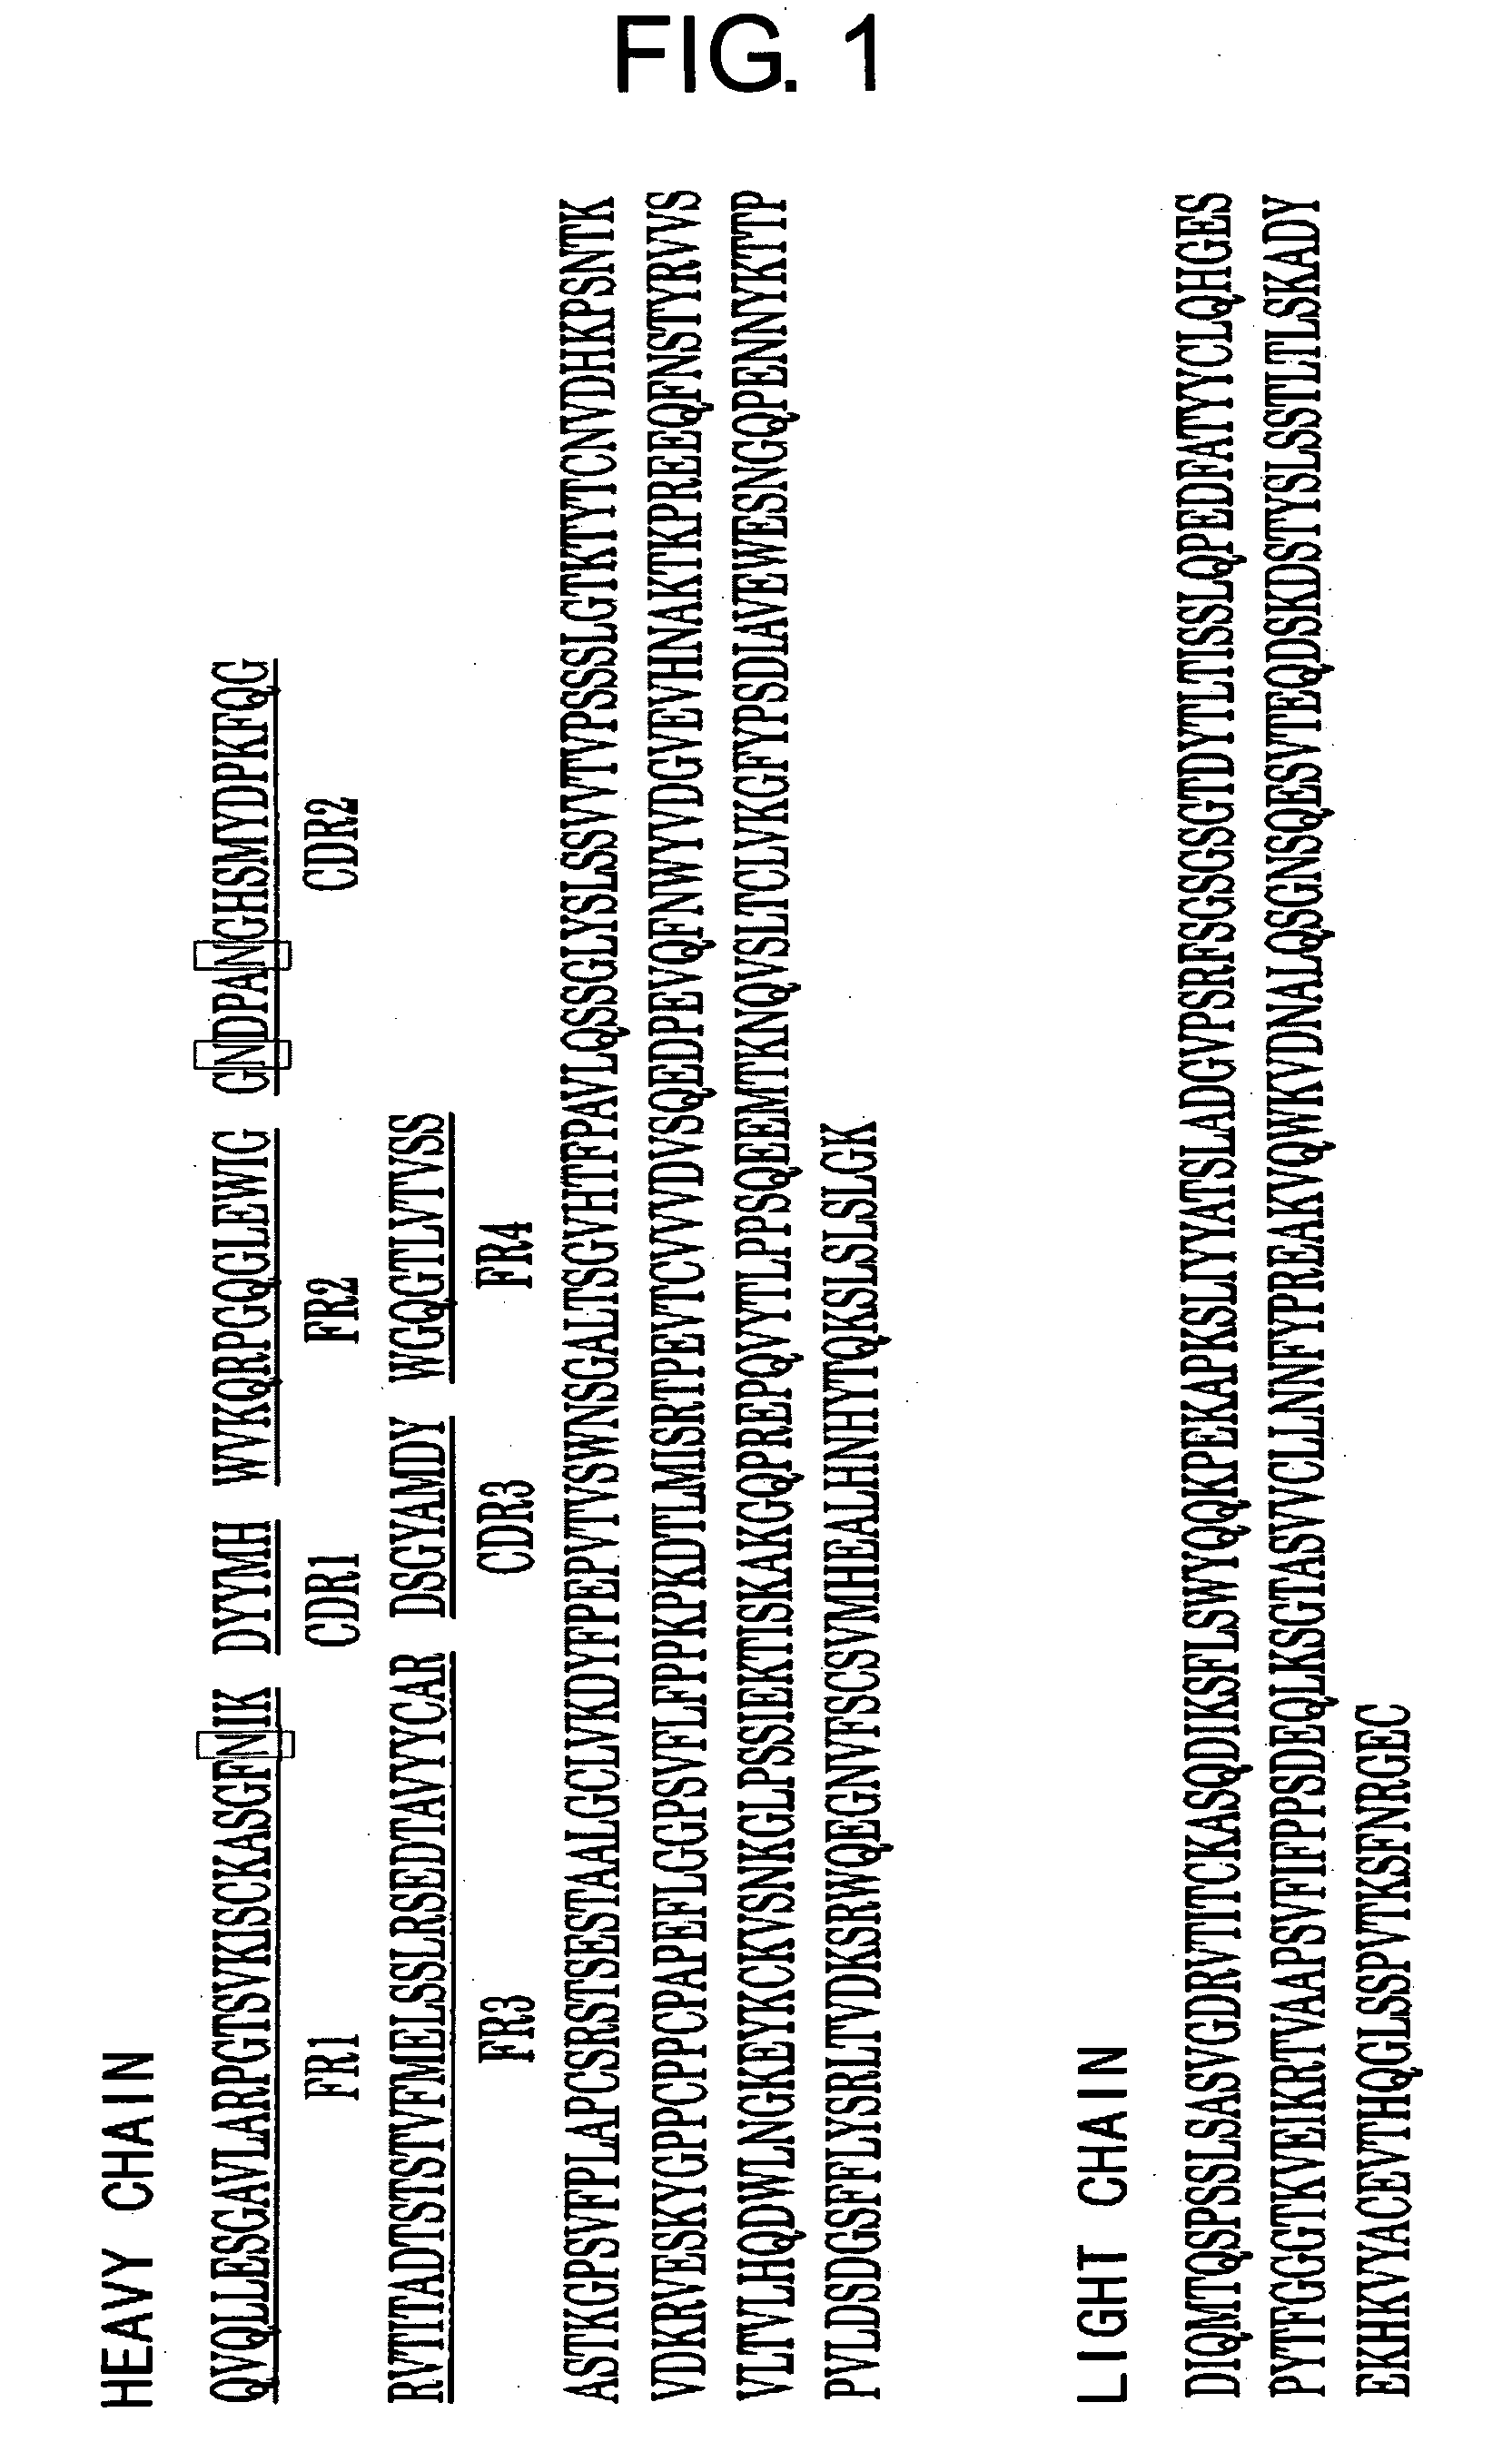 Method of stabilizing protein